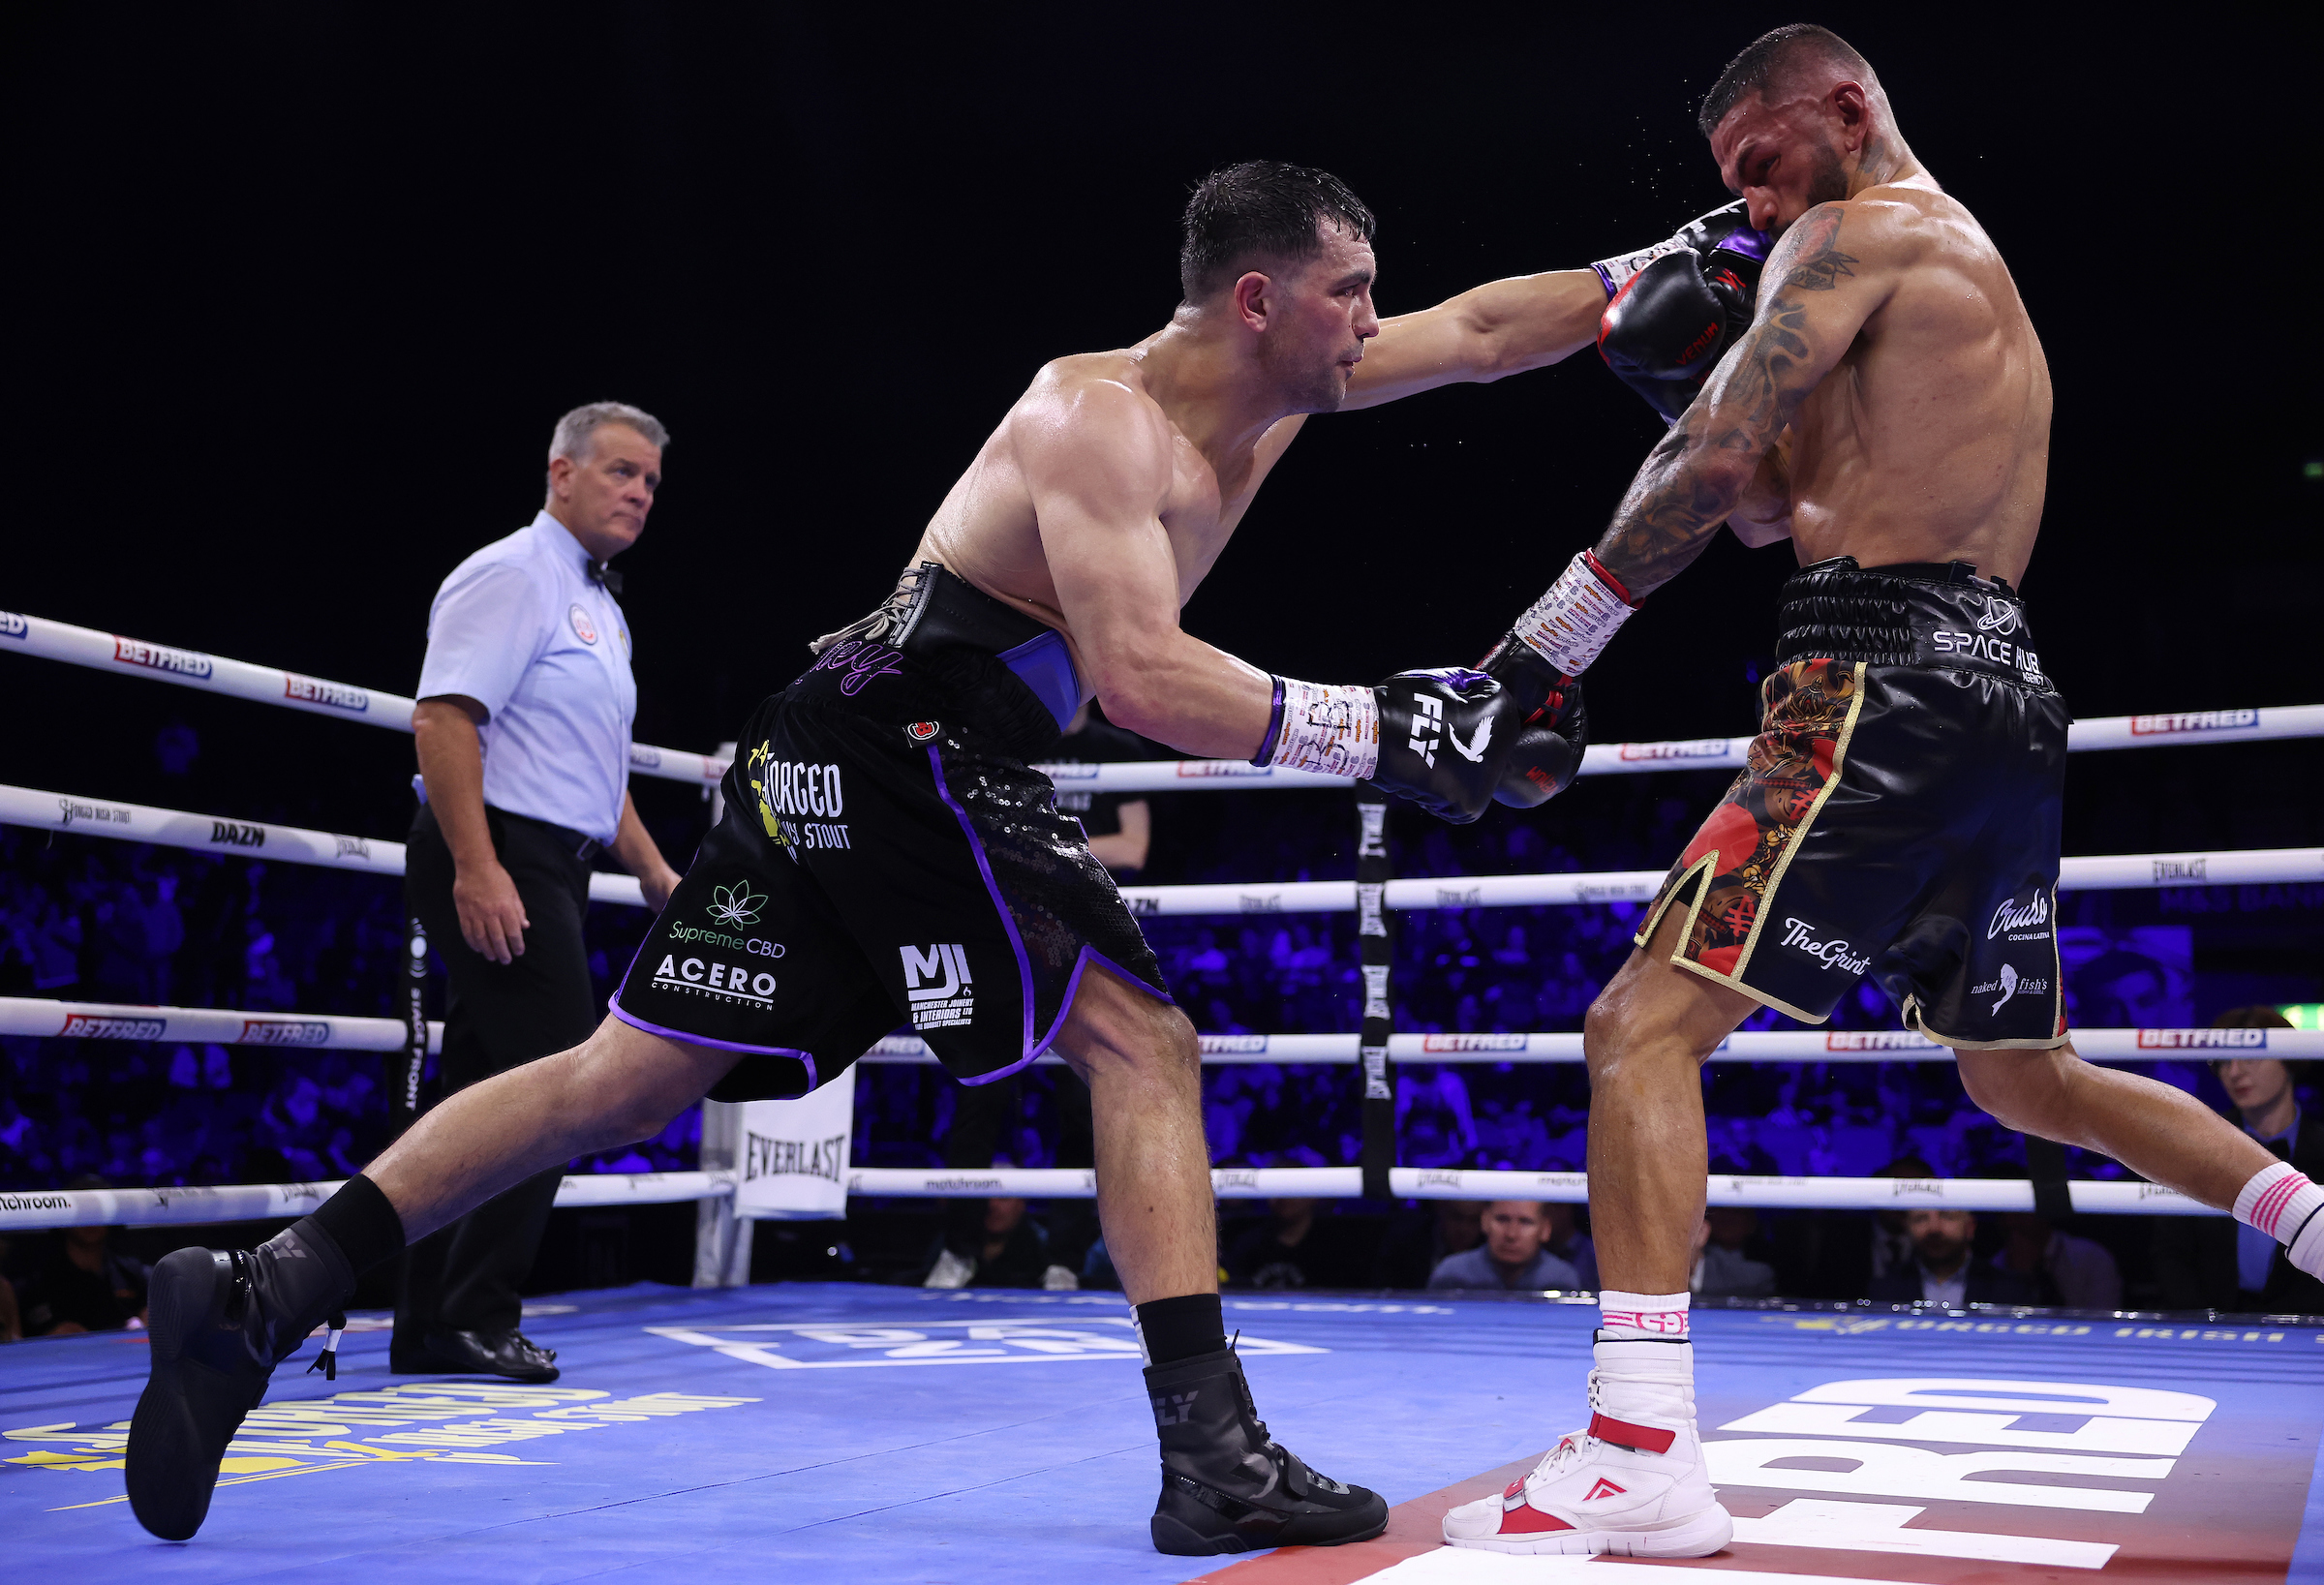 Catterall calls for Taylor rematch after decisioning legend Linares, who now faces retirement  